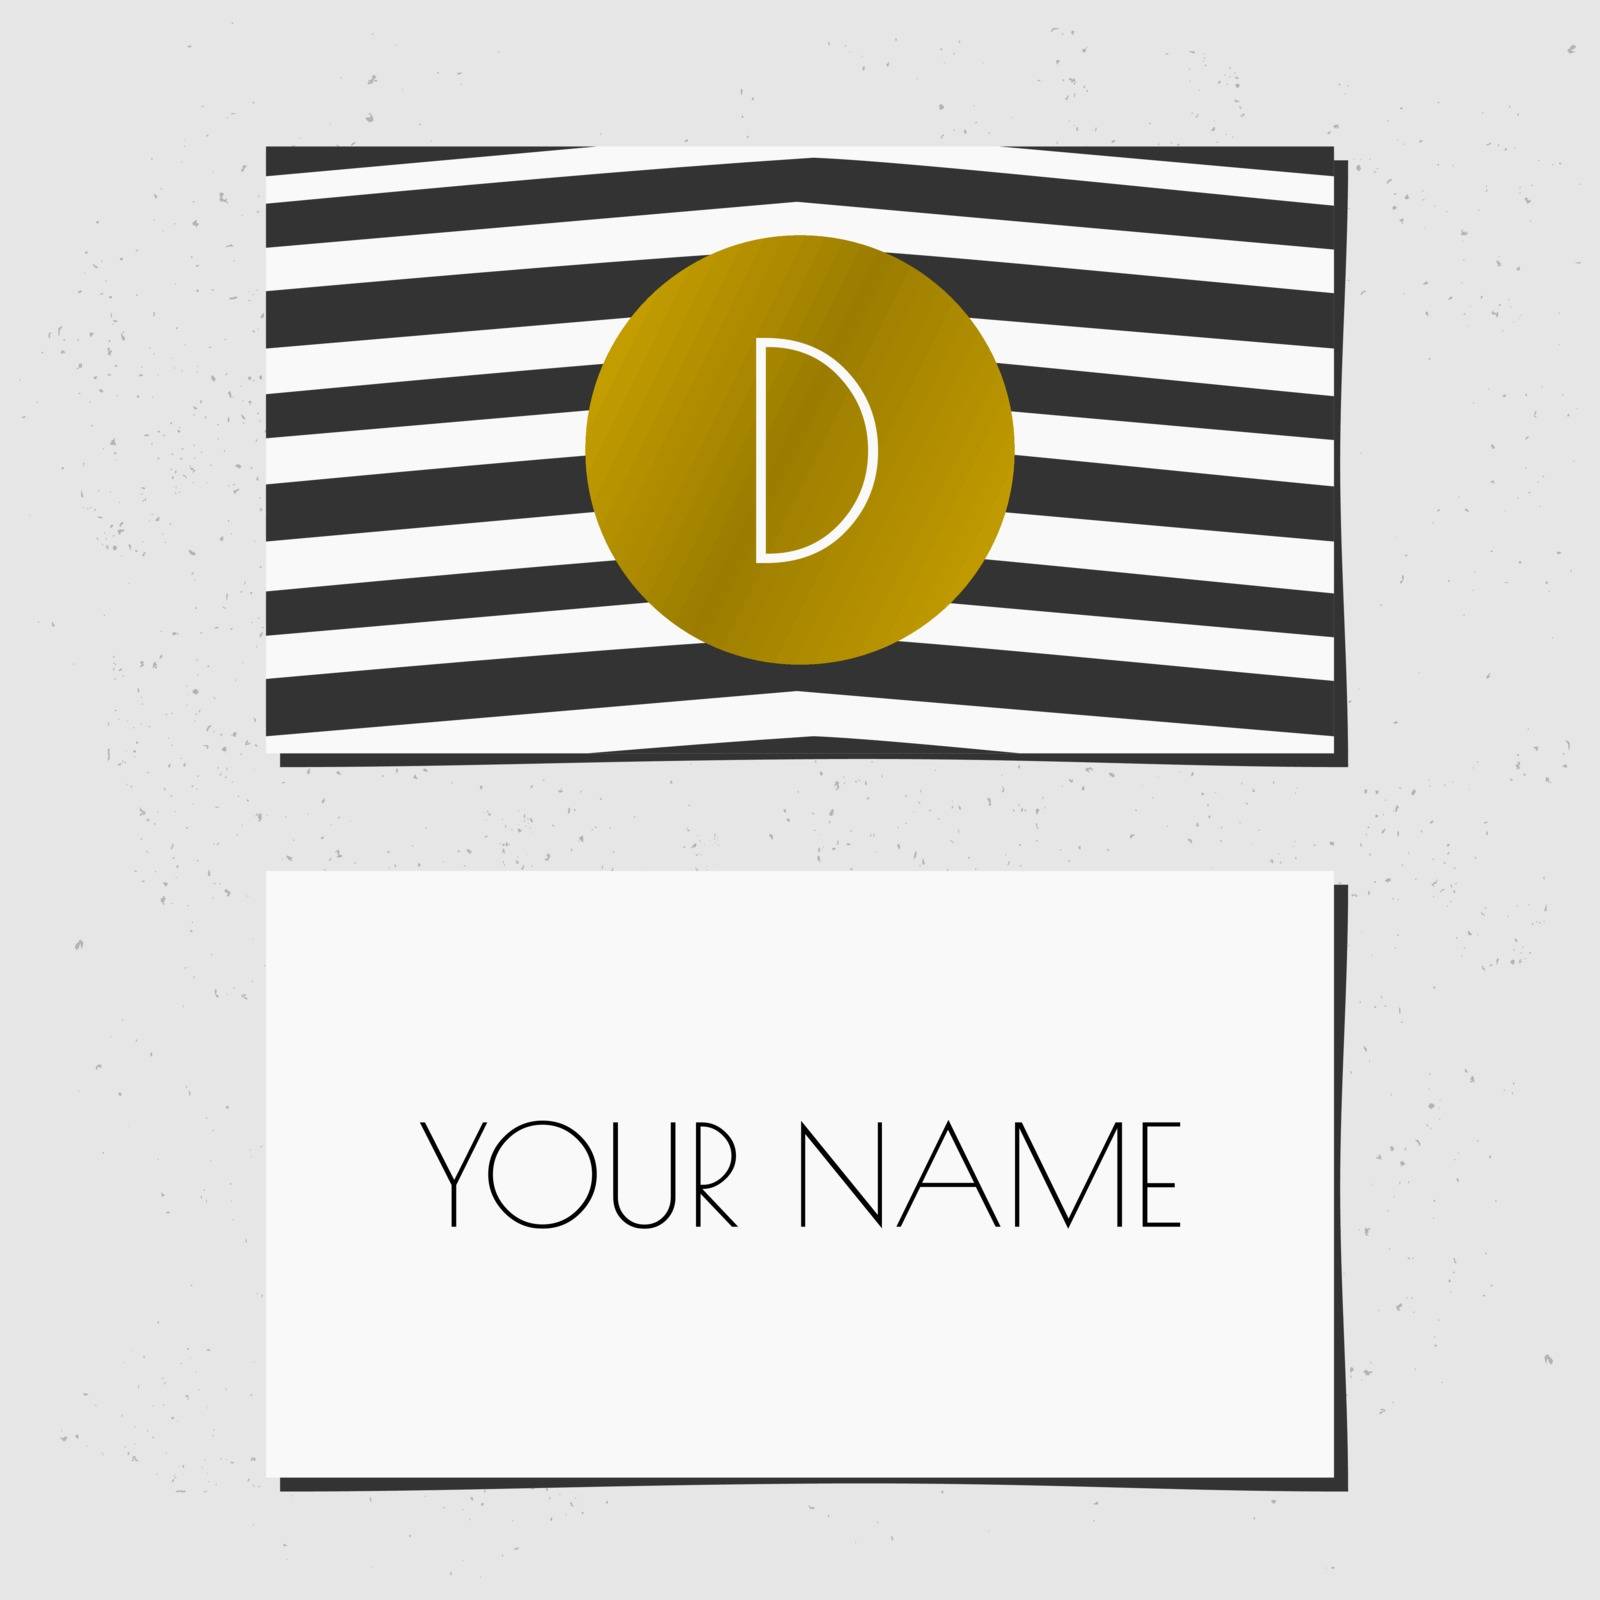 Modern business card template design. Golden circle with monogram letter on a black and white chevron background.